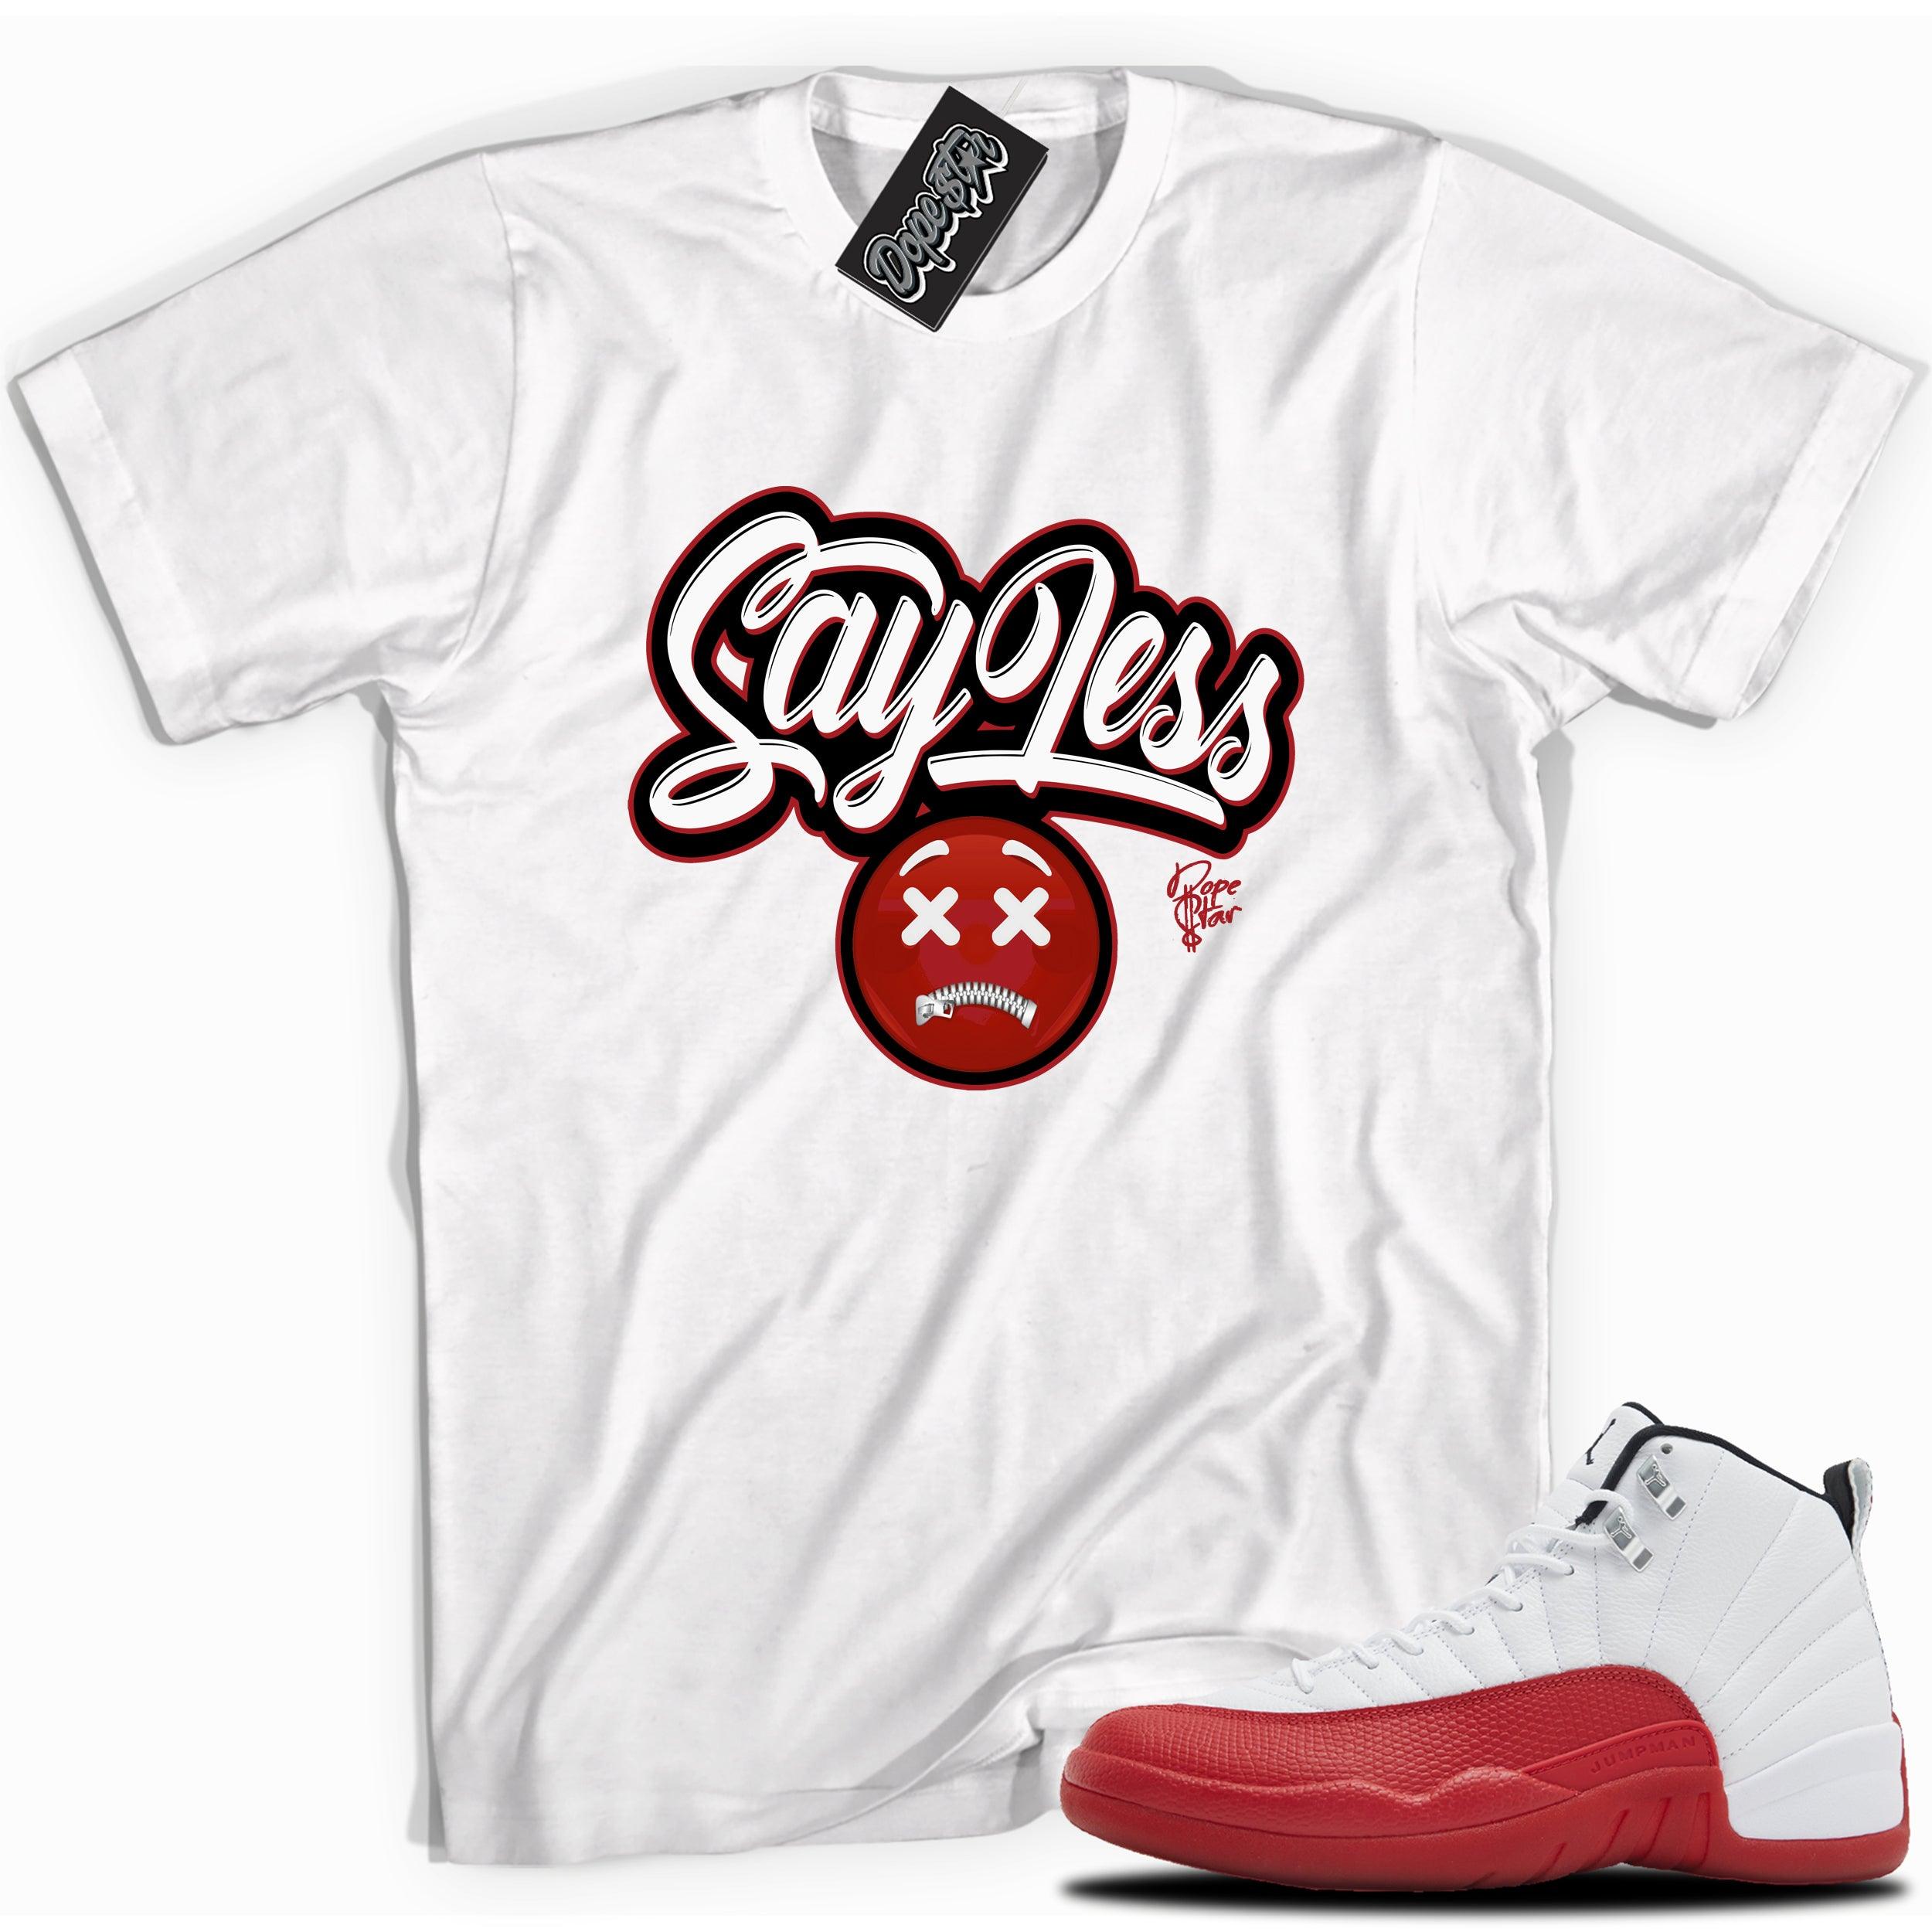 Cool White graphic tee with “SAY LESS” print, that perfectly matches Air Jordan 12 Retro Cherry Red 2023 red and white sneakers